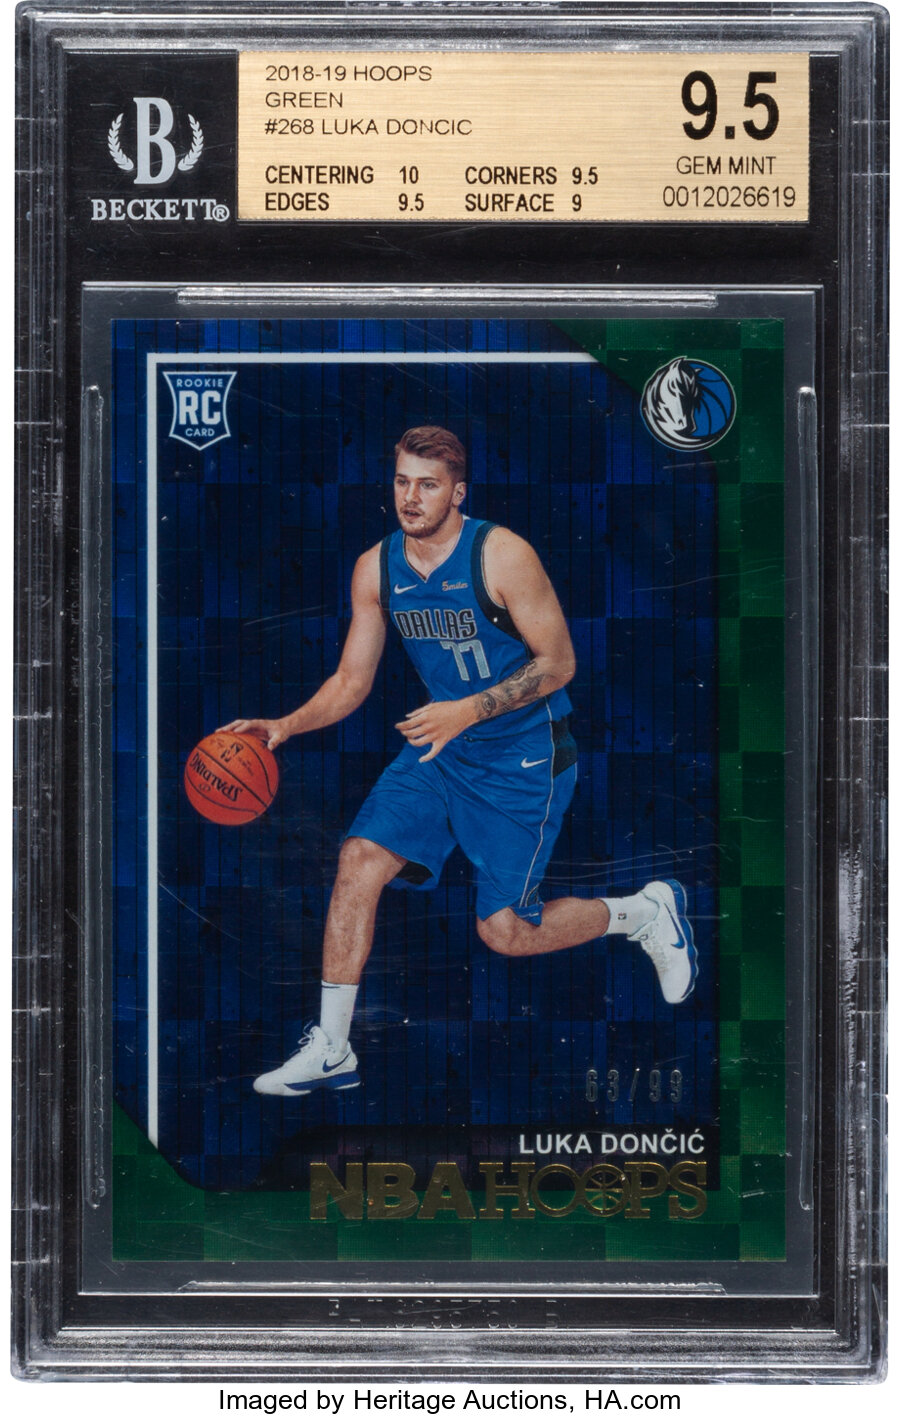 2018 Panini Hoops Luka Doncic (Green) #268, BGS 9.5 - Limited Edition 63/99